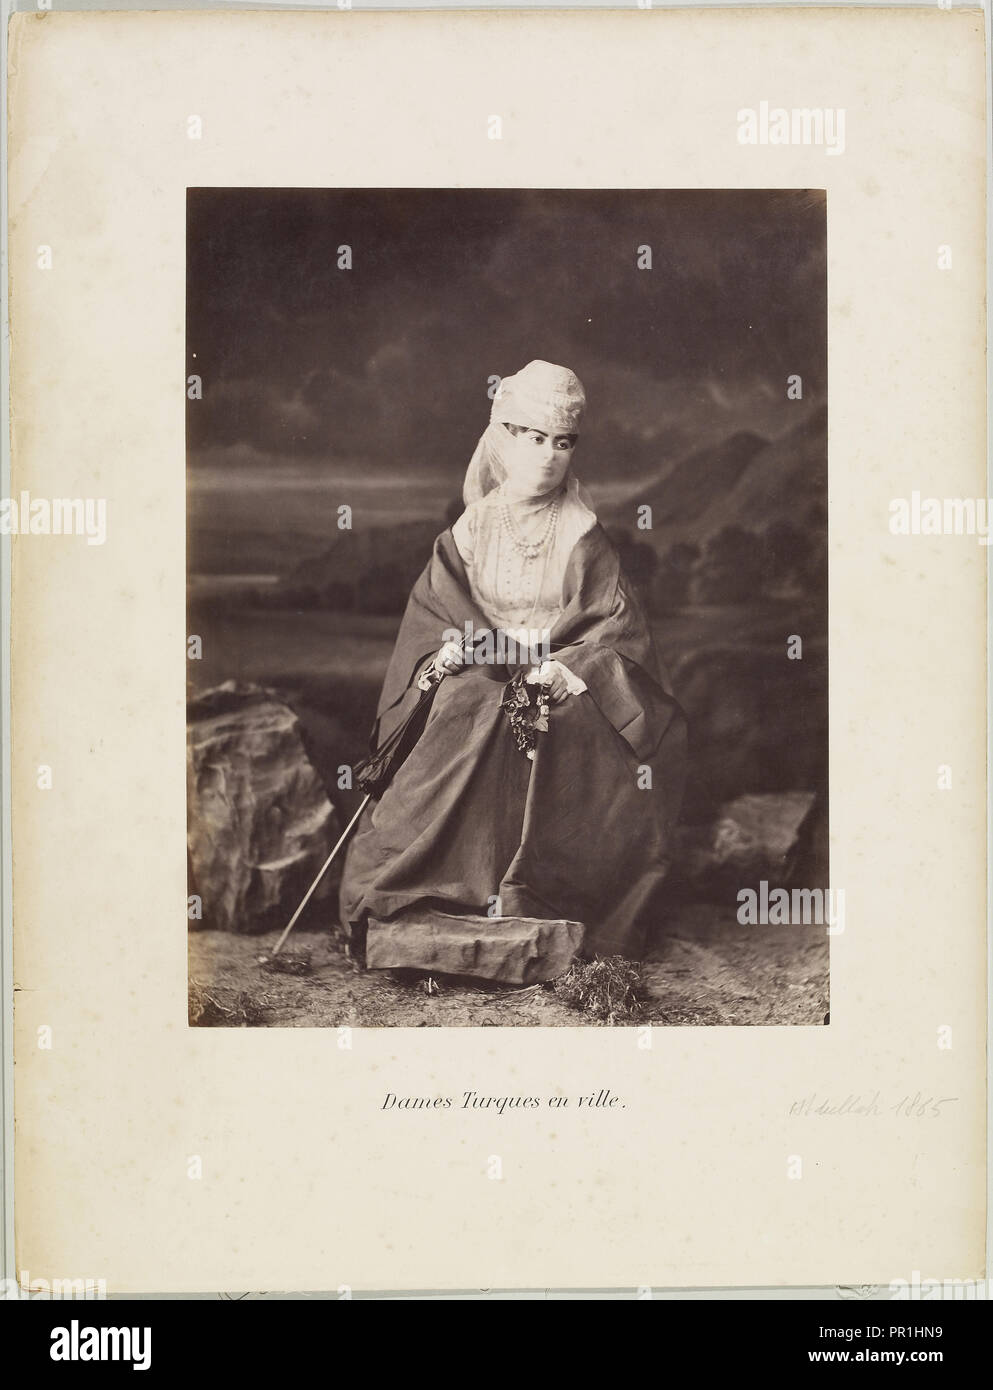 Dames turques en ville, photographs of the Ottoman Empire and the Republic of Turkey, Views Stock Photo